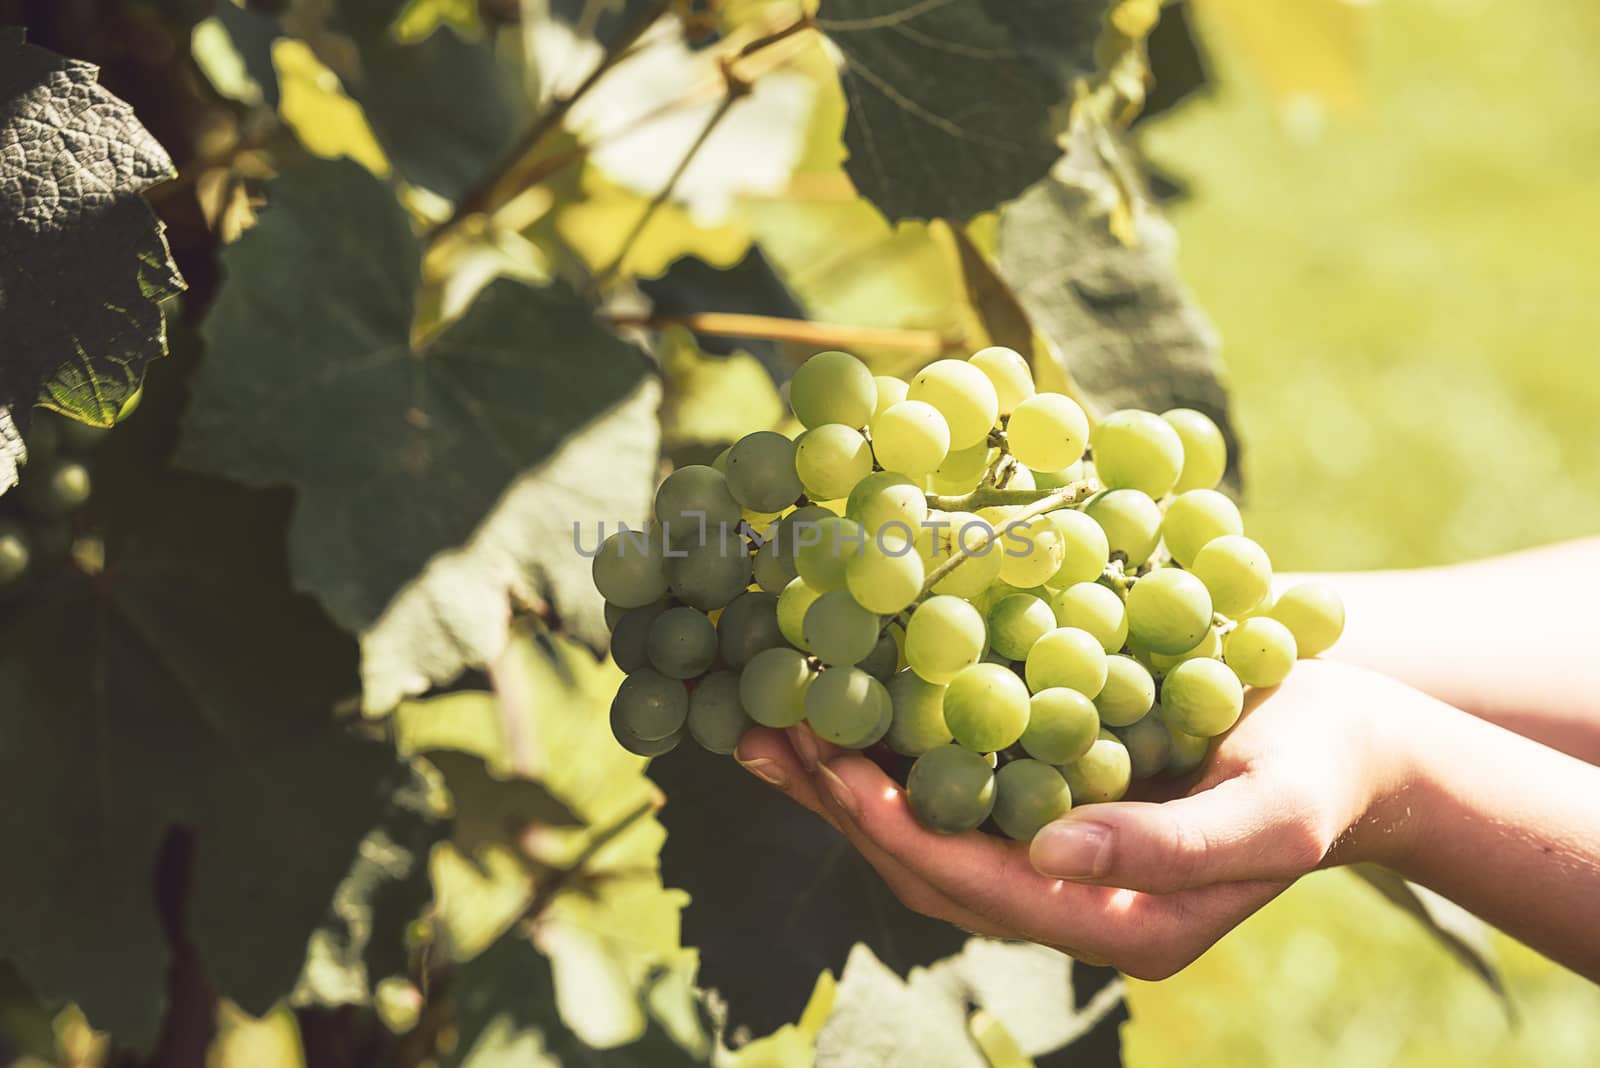 The woman's hand holds a large cluster of grapes during grapes harvest (vintage effect).